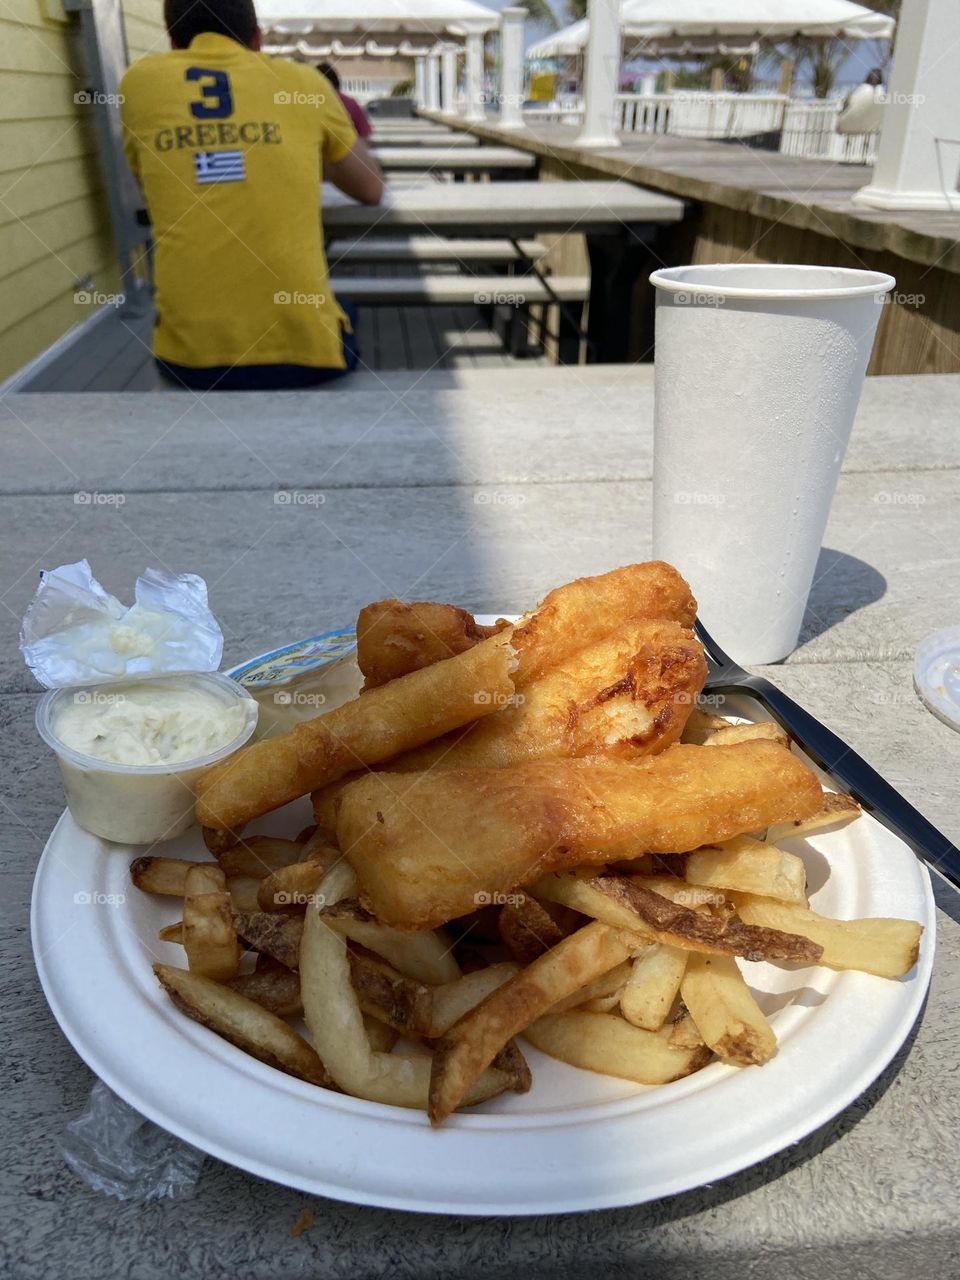 Fish and chips at the boardwalk is an essential part of summer. It seems a lot of my summer revolves around food! This is pictured at a table behind a food stand at the boardwalk. There is a view of the beach, but I was focused on the food. 